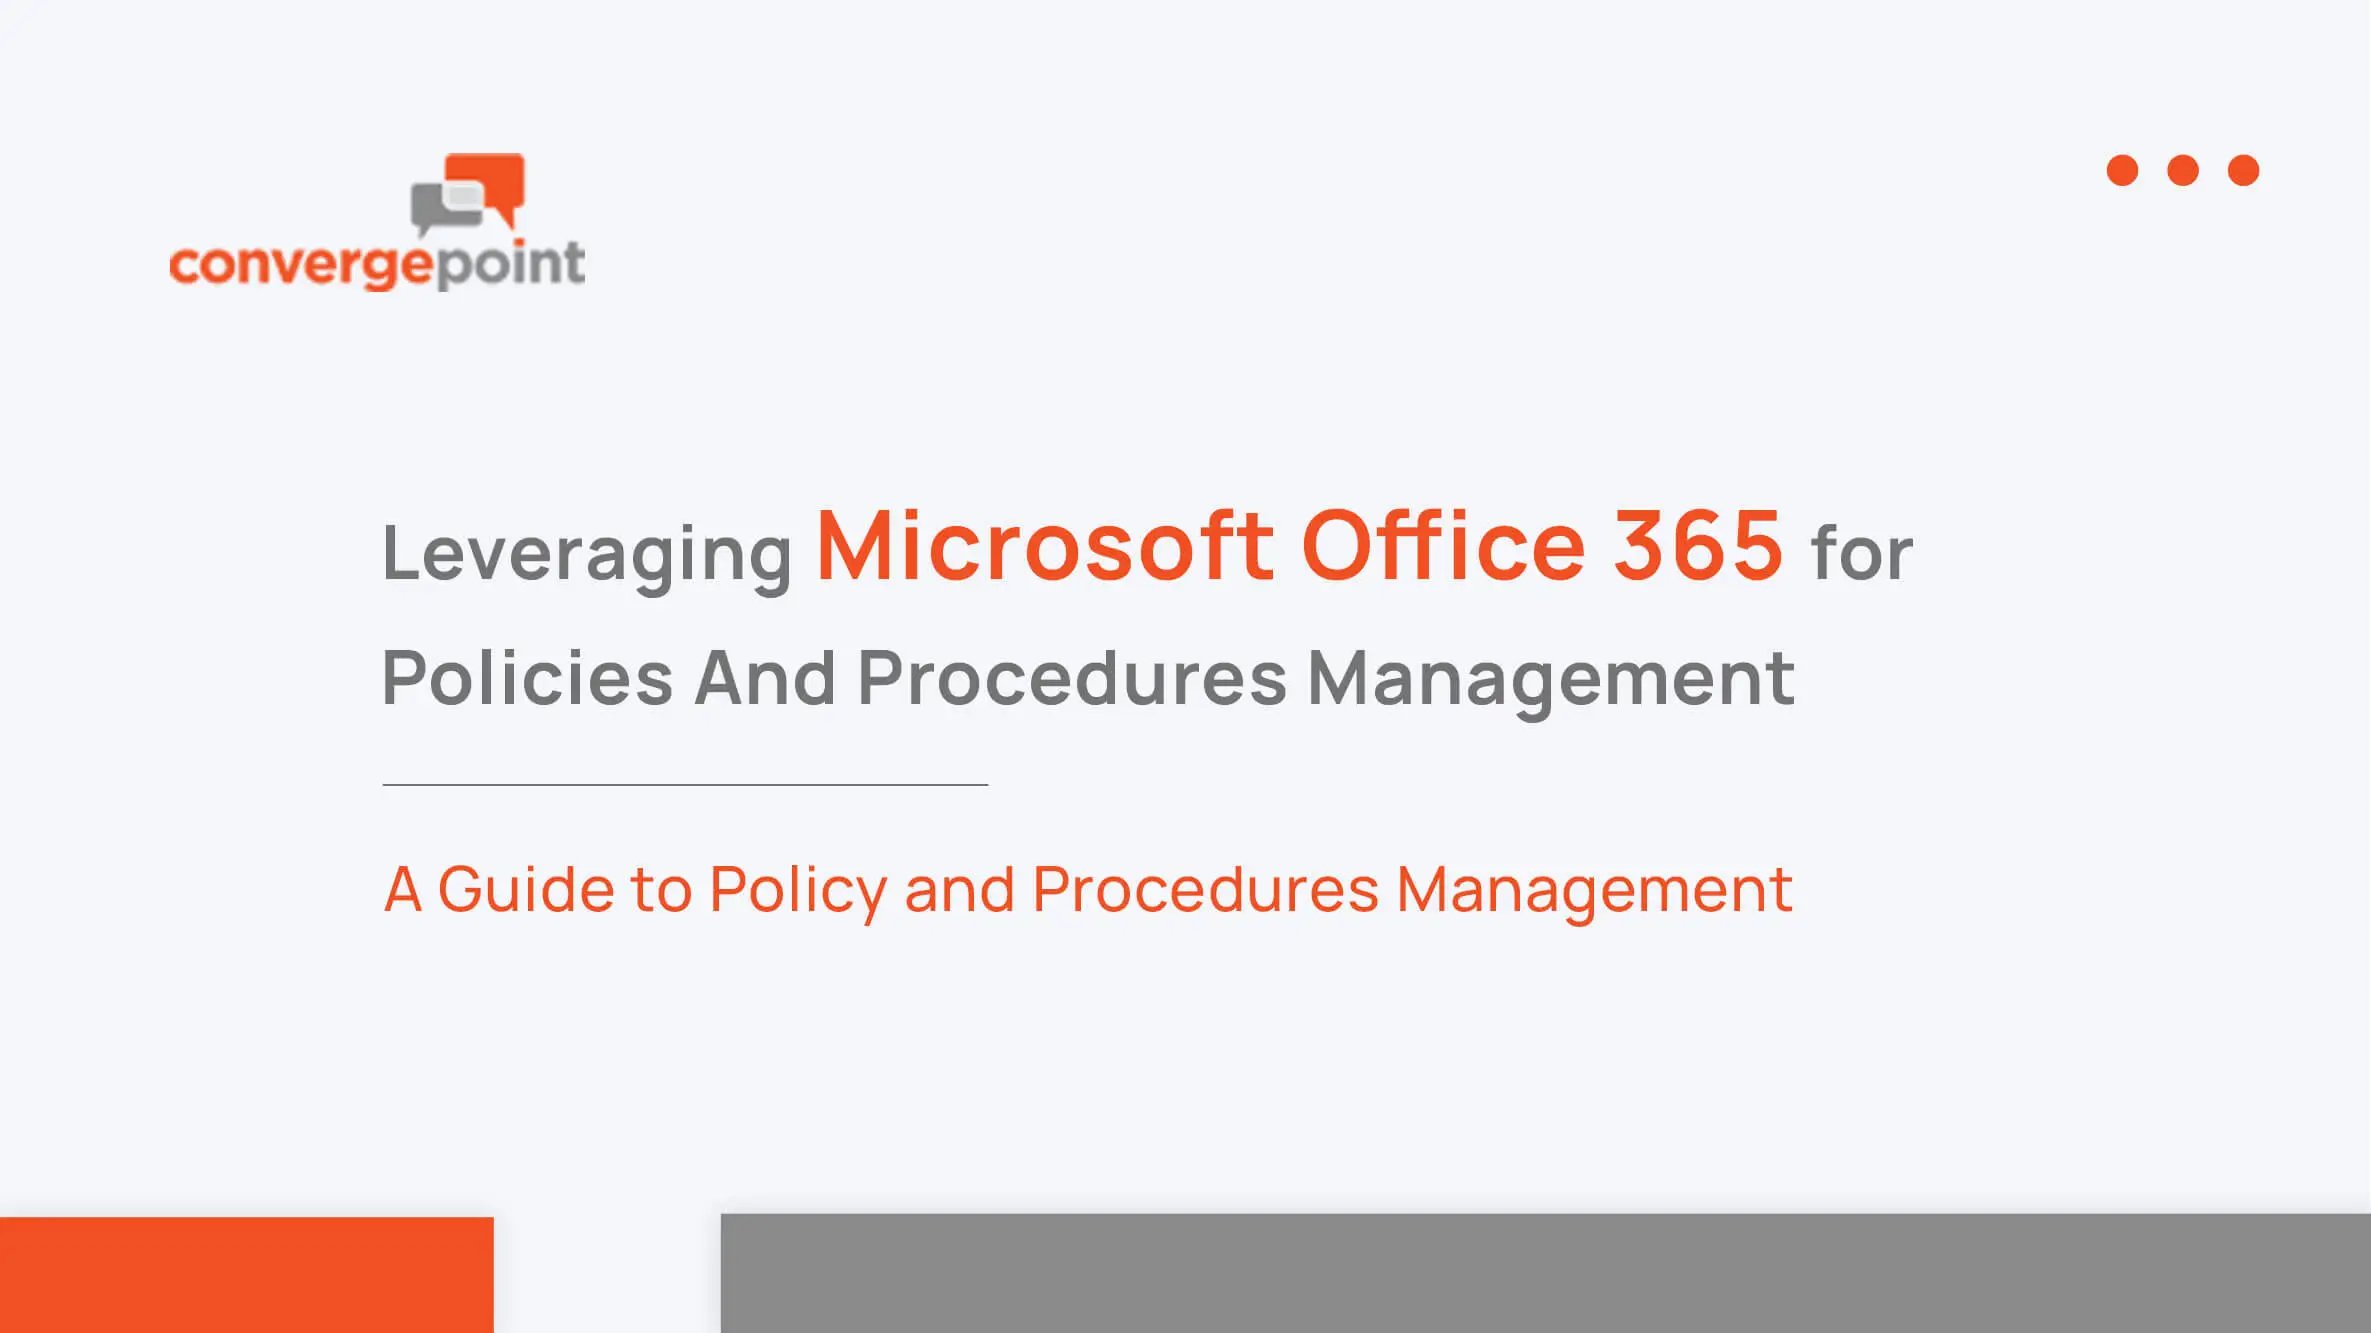 Leveraging-Microsoft-Office-365-for-policy-and-procedure-management-1